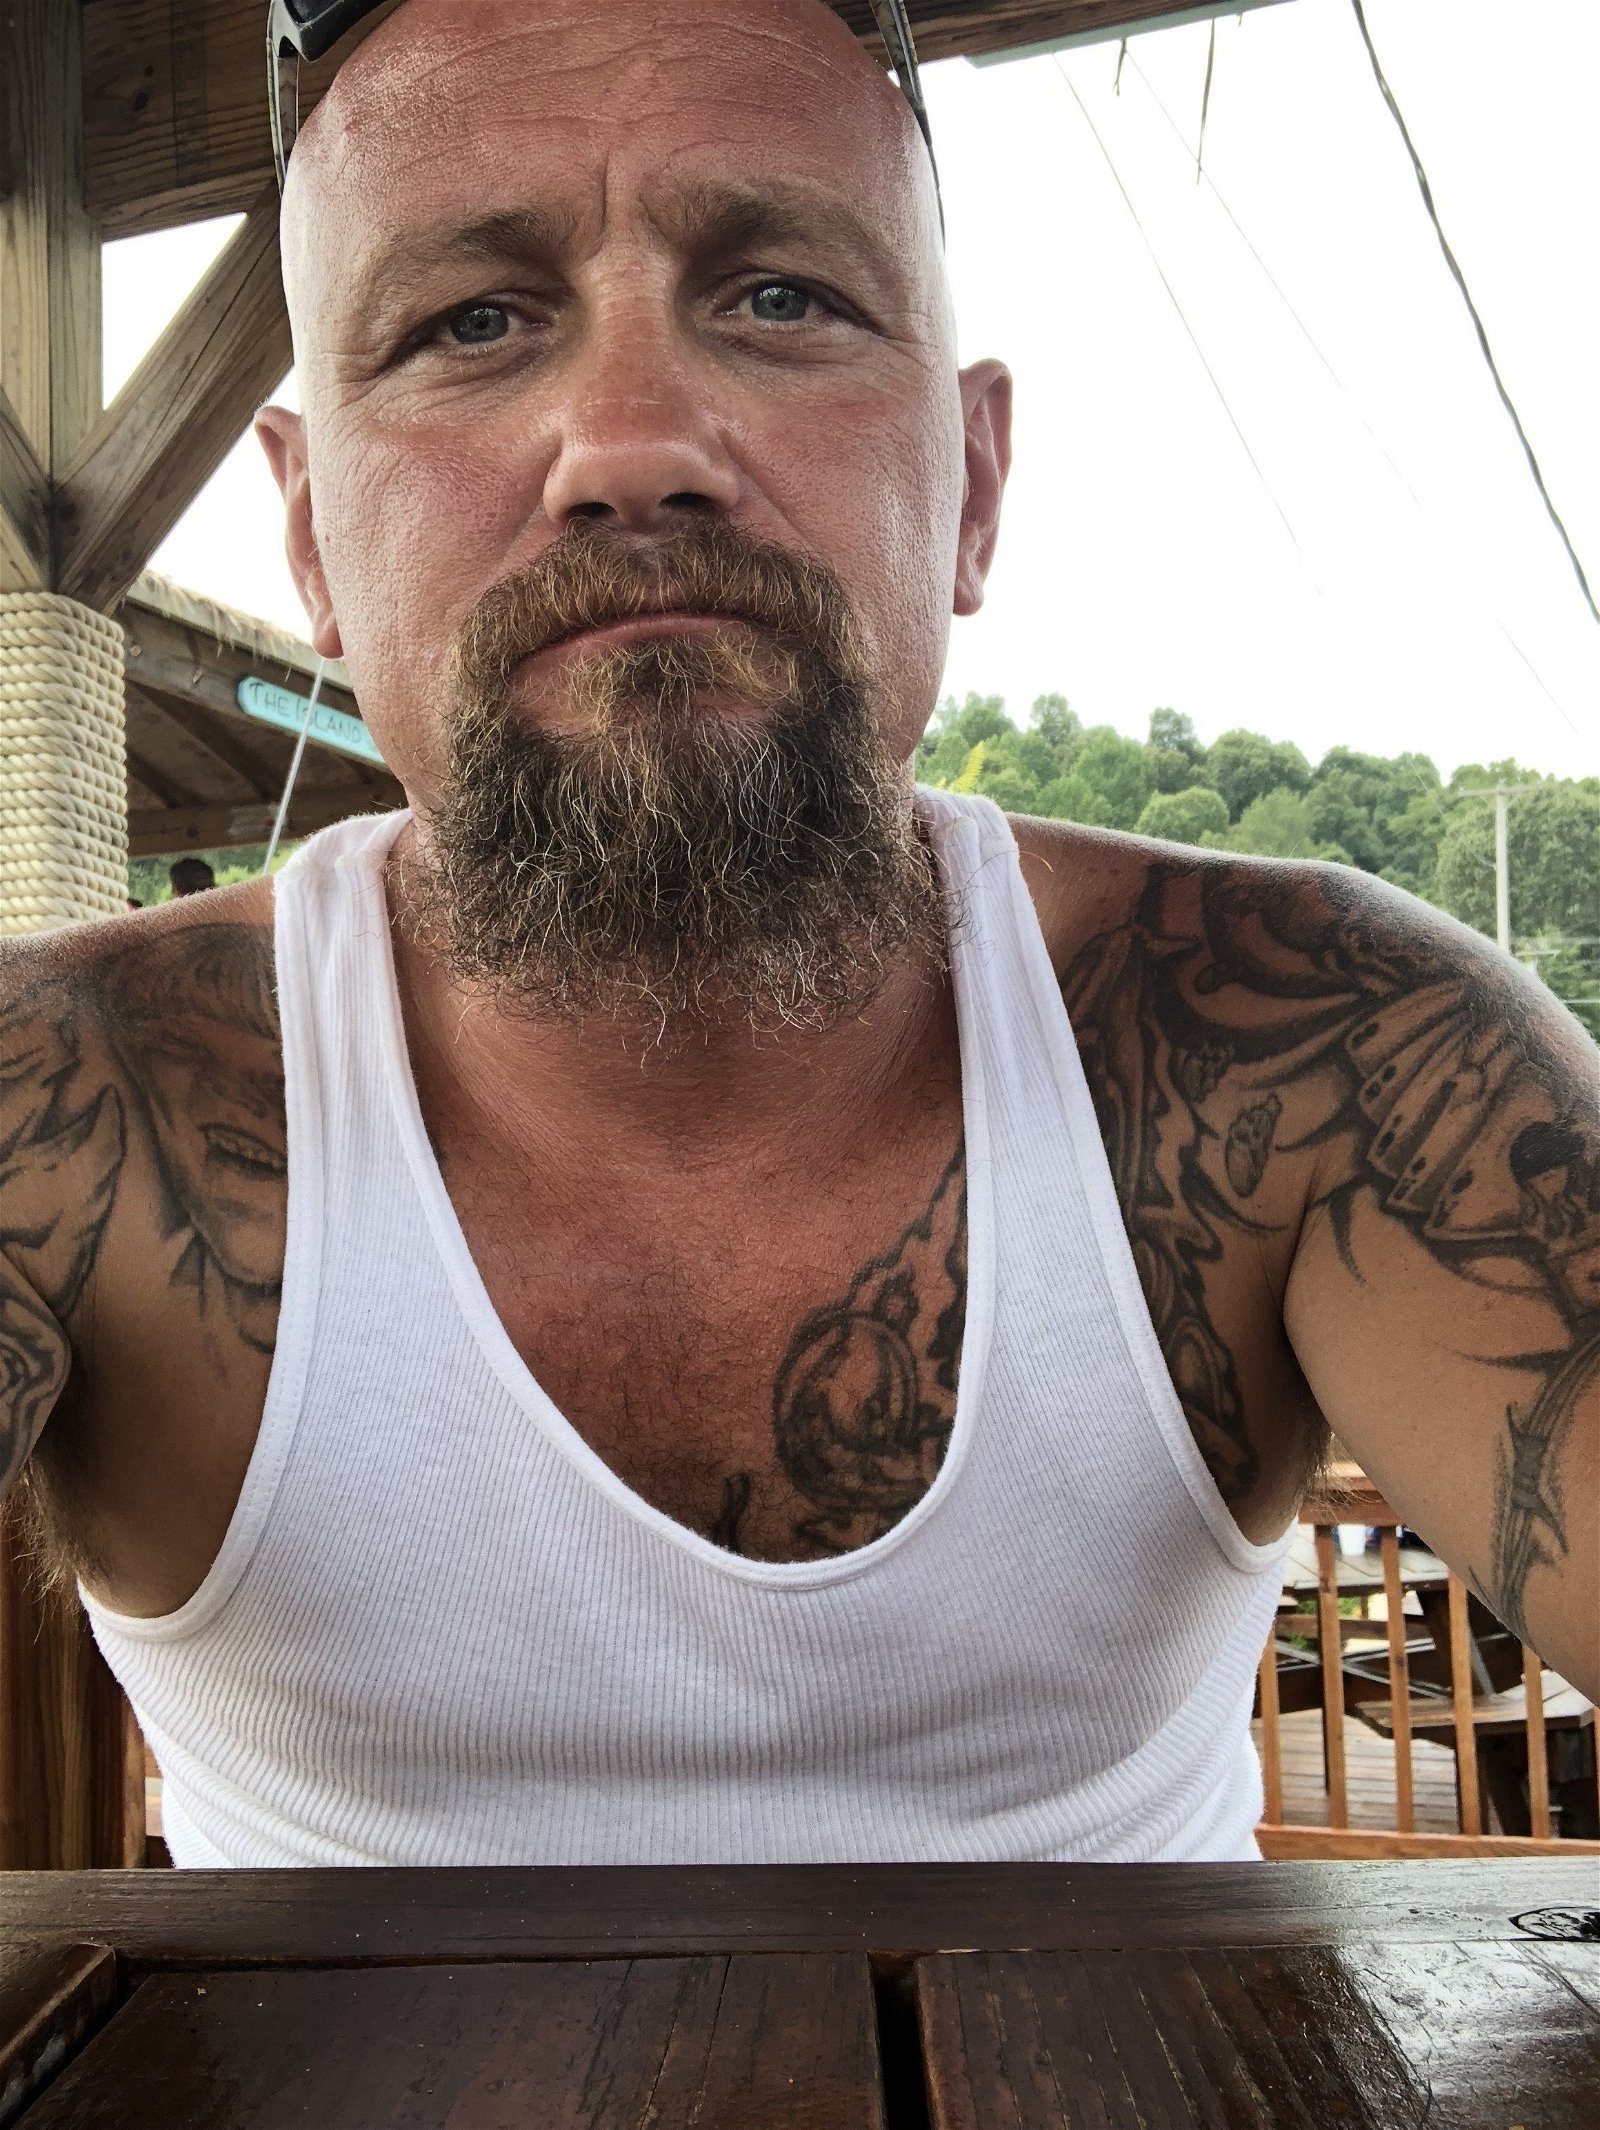 Watch the Photo by Jbird469 with the username @Jbird469, who is a verified user, posted on December 18, 2019 and the text says 'Out for a ride and looking for a cold beer'